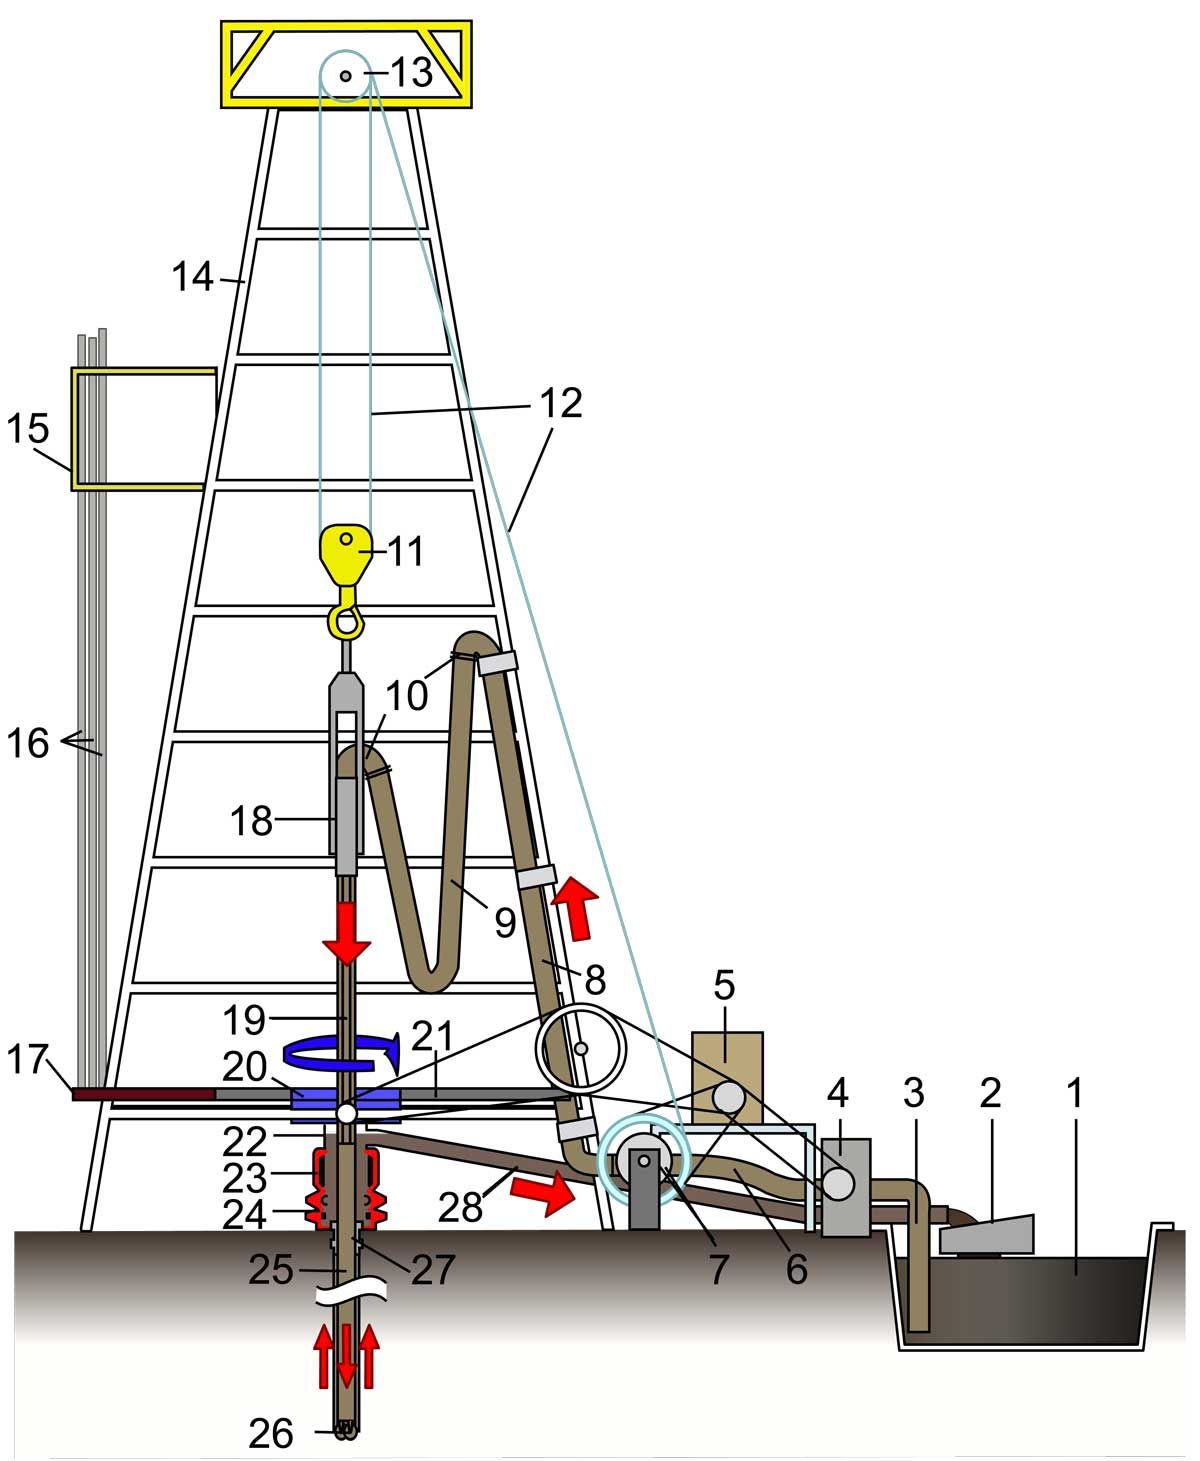 Schematic of an oil-drilling rig